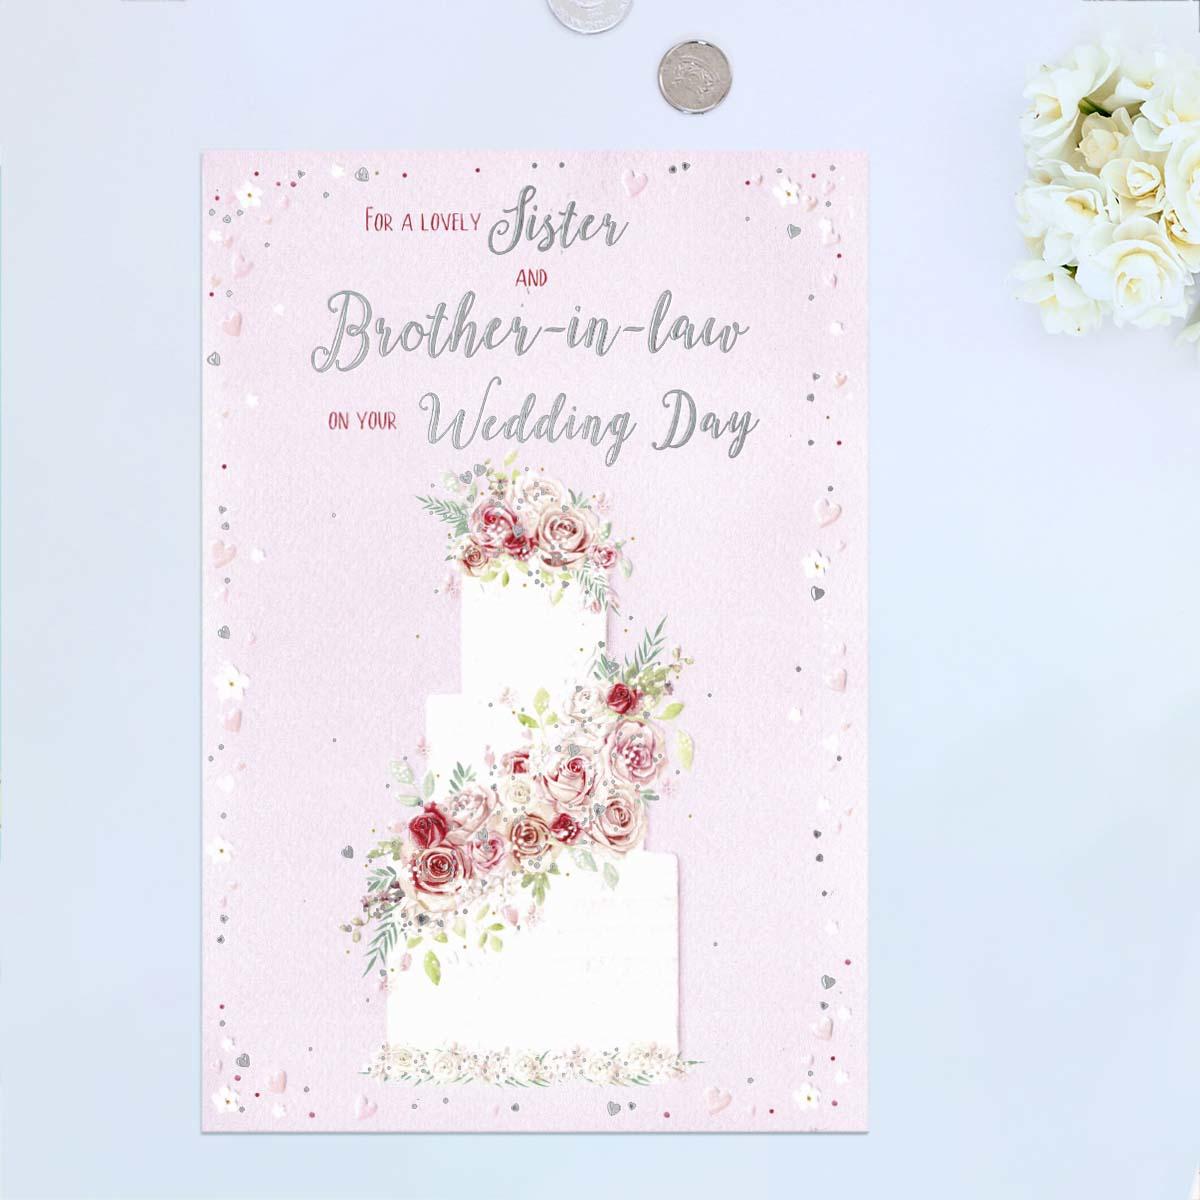 Lovely Sister And Brother In Law Wedding Day Card Front Image